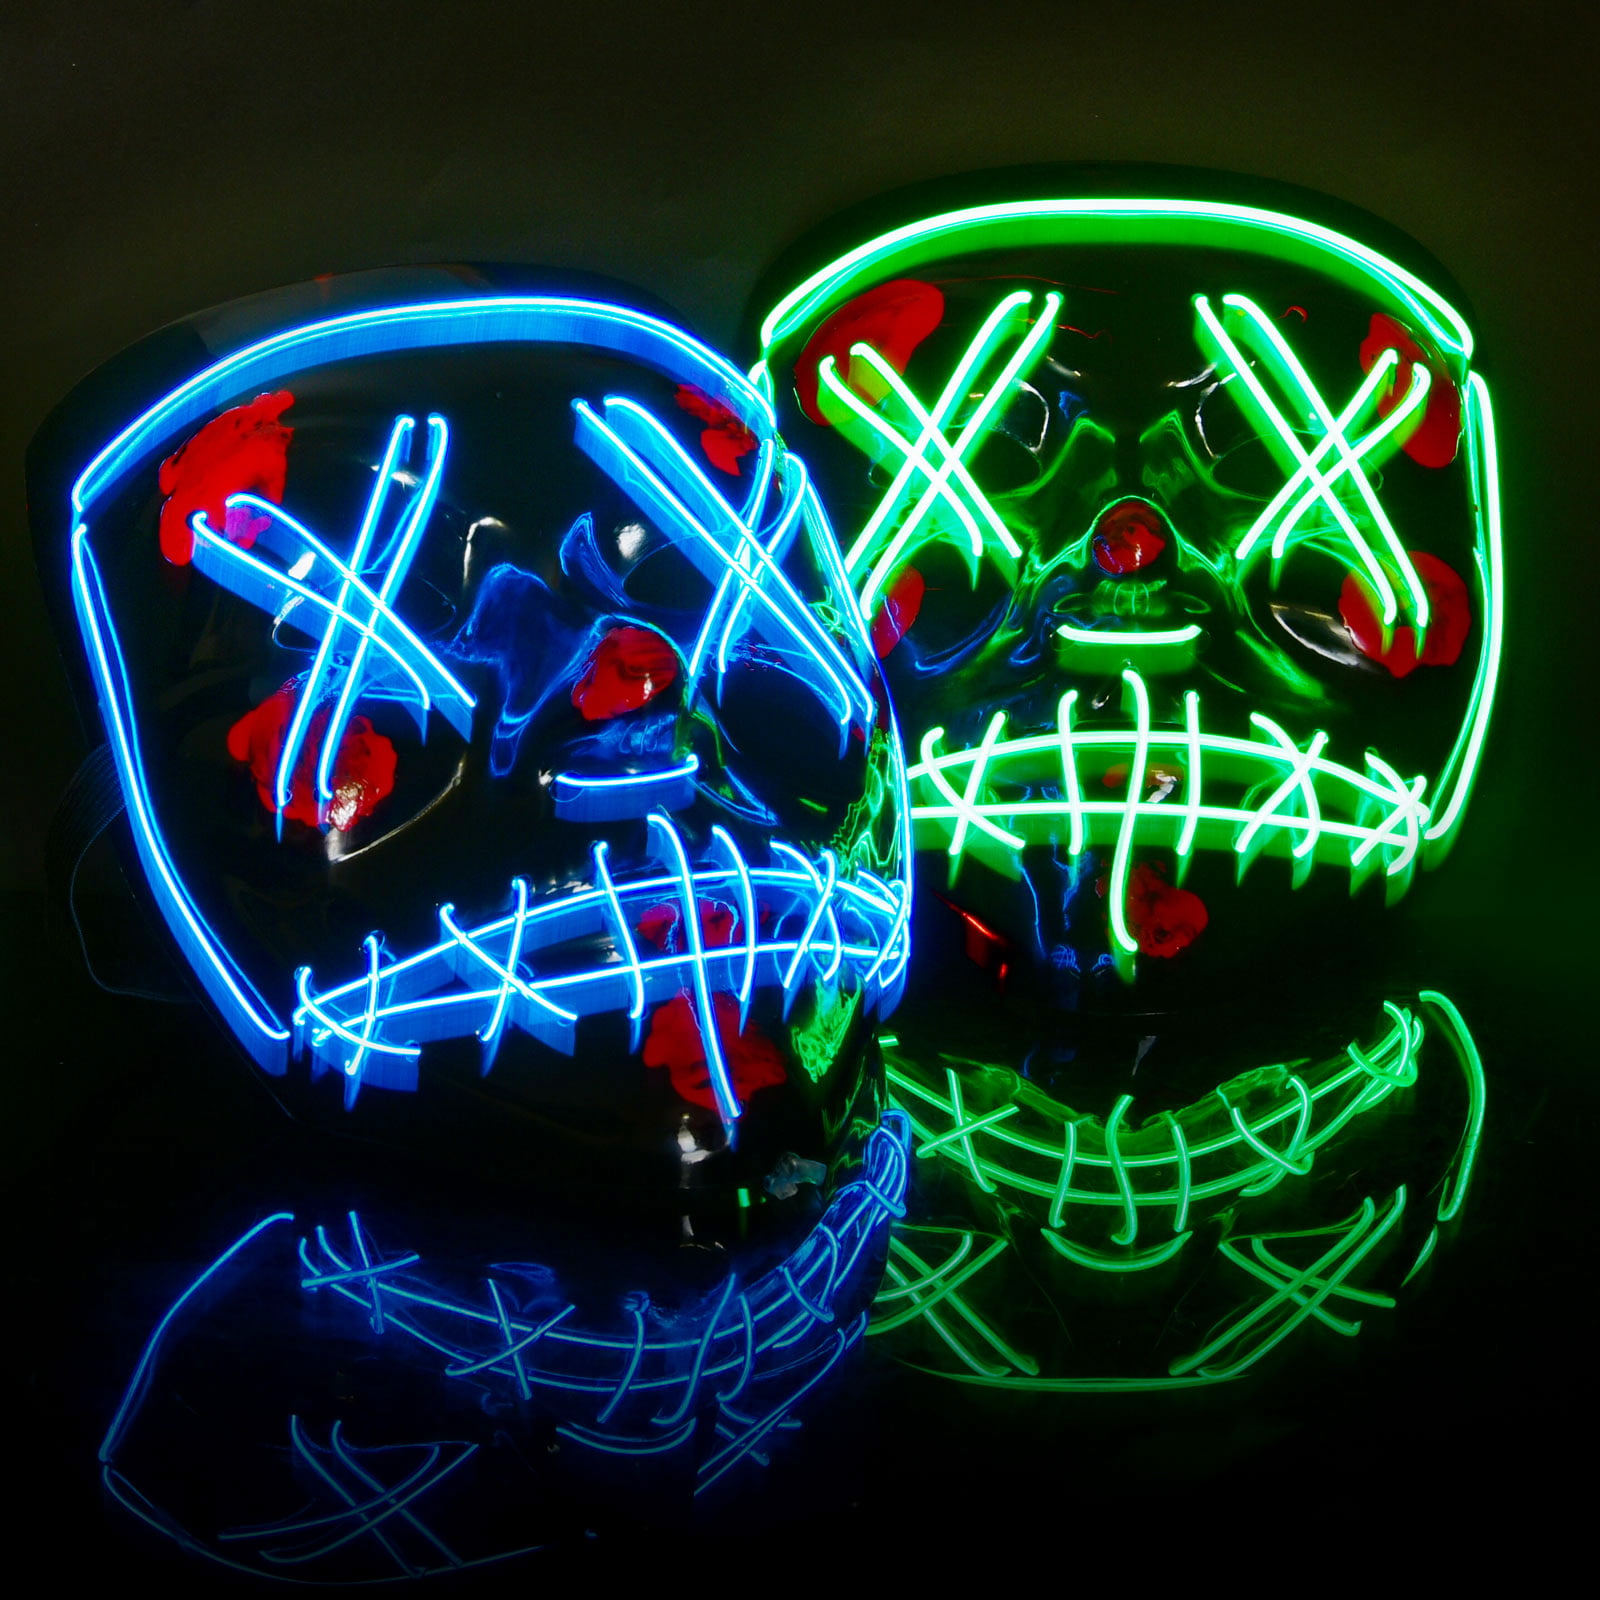 LUKAT LED Halloween Mask Scary Halloween Costume Mask with EL Wire Light up 3 Flashing-Modes and Soft Sponge for Halloween Cosplay